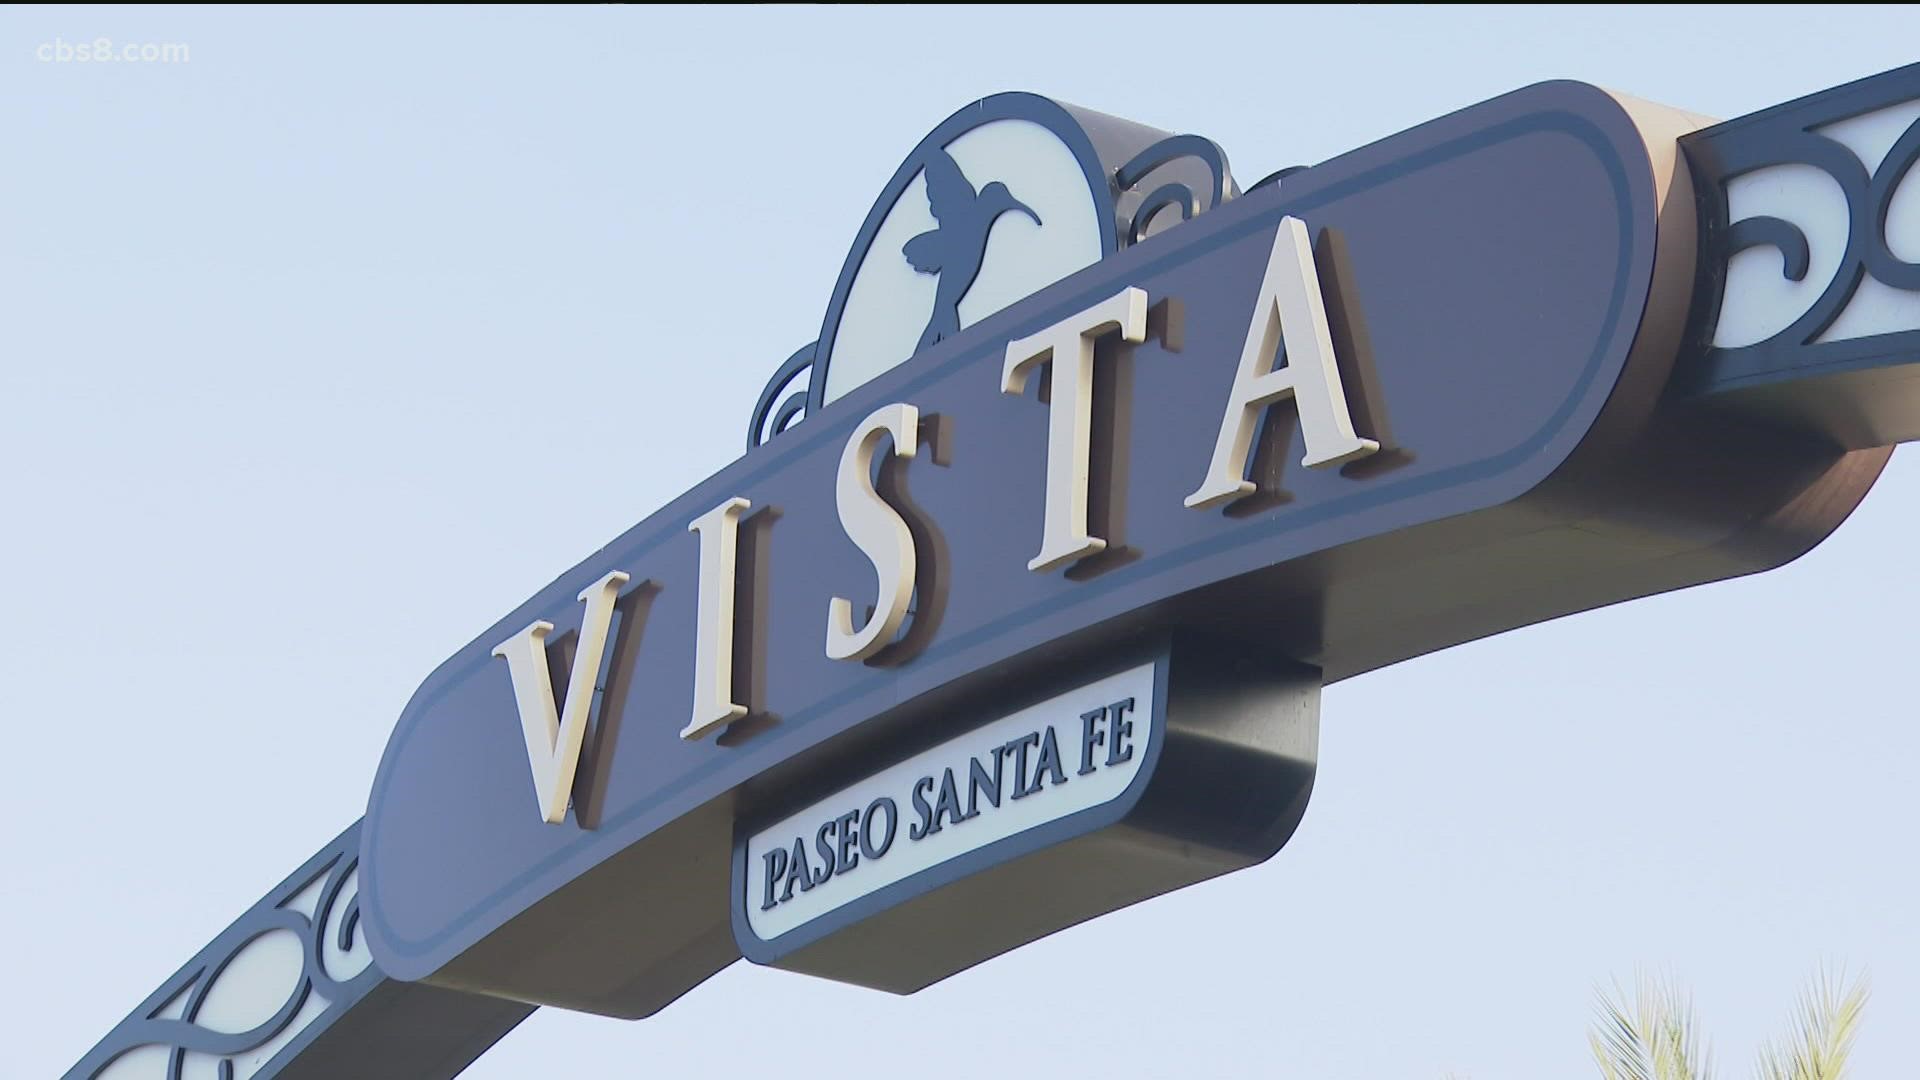 After $30 million, 20 years to plan, and six years of construction, the Paseo Santa Fe project in Vista is finally complete.